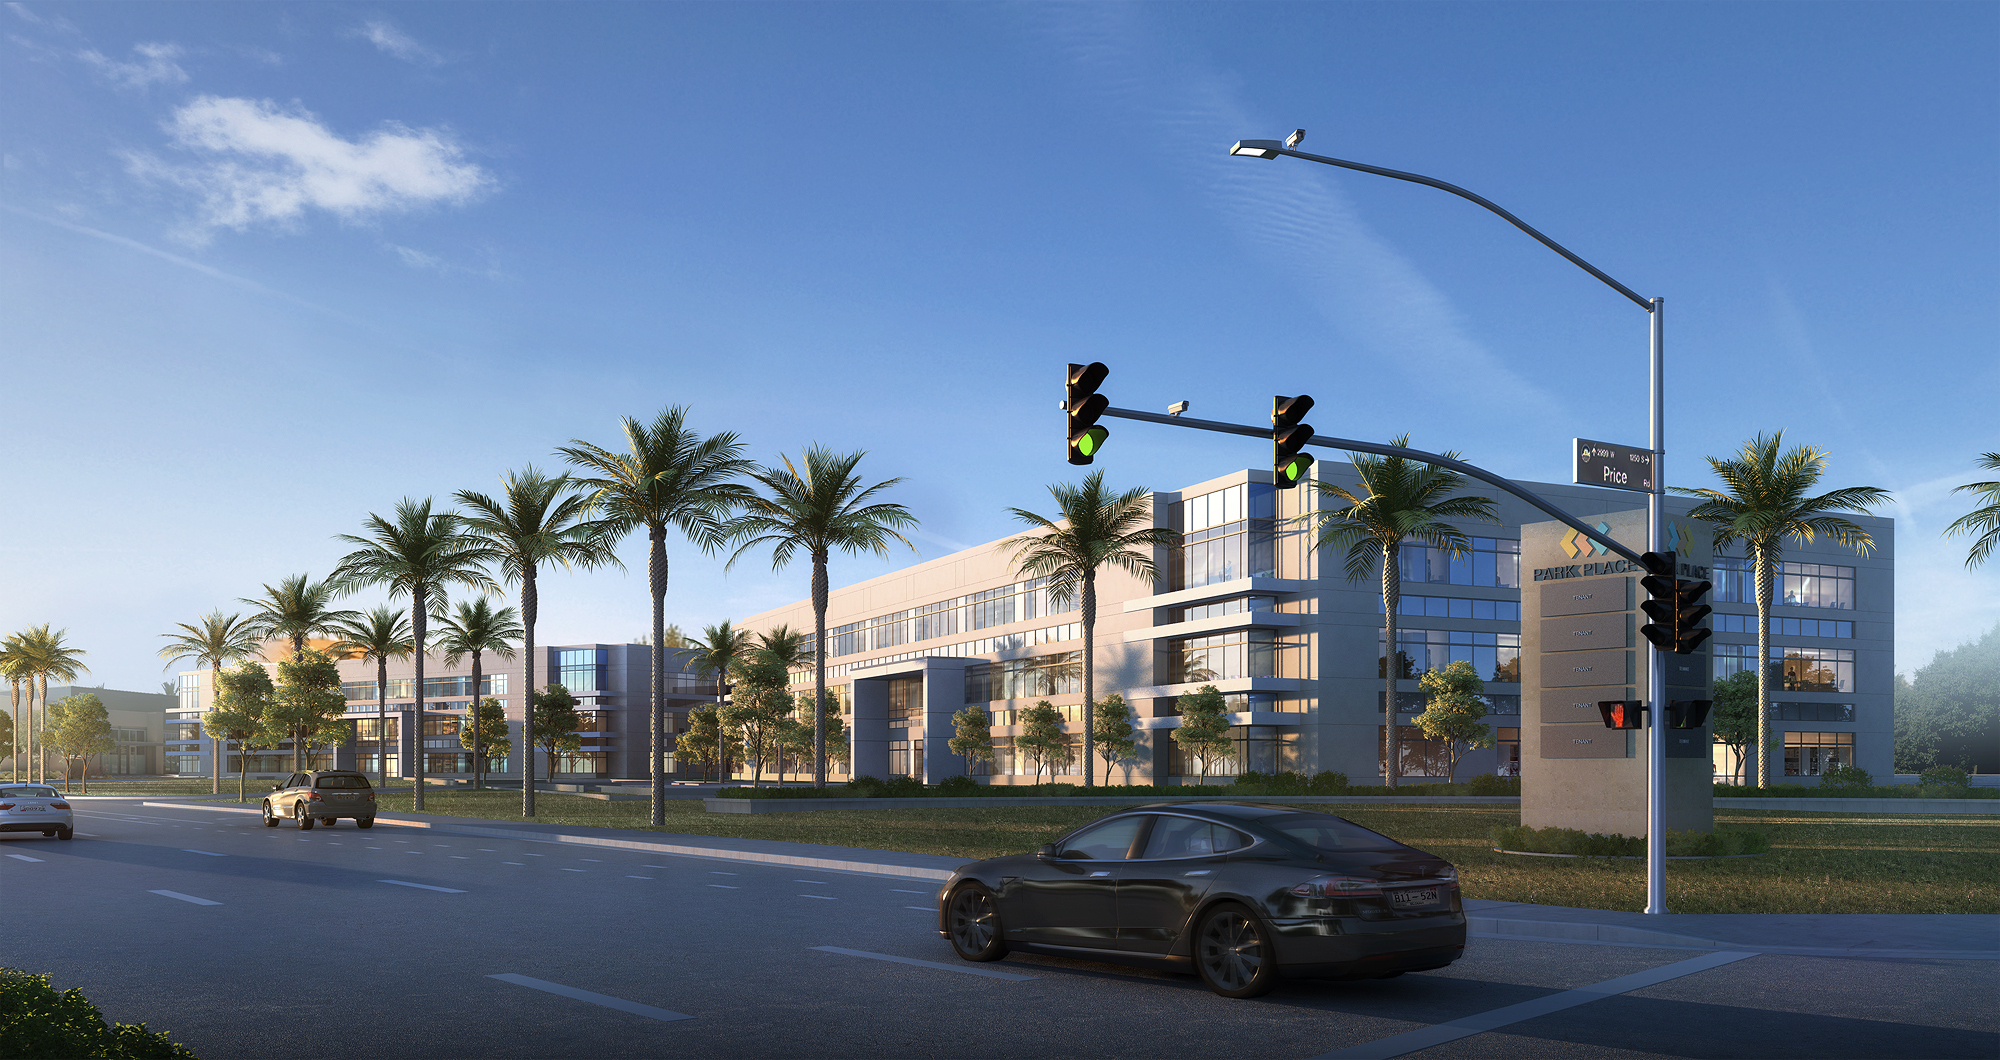 Willmeng Breaks Ground on a rendering of a building with palm trees.